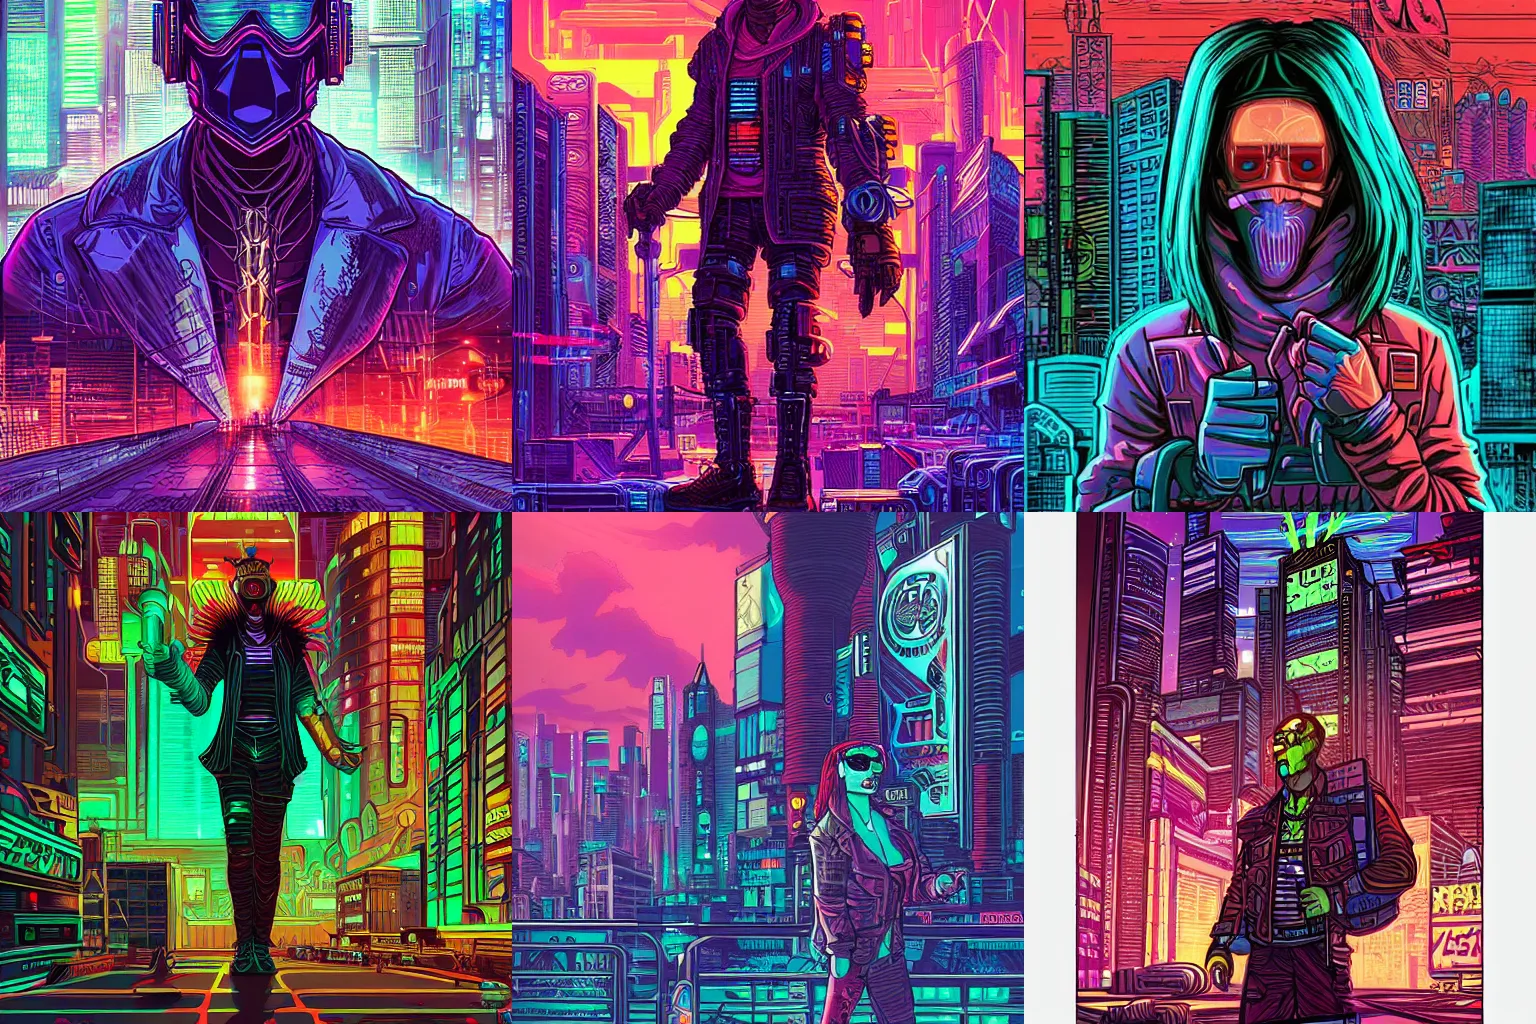 Prompt: a portrait of a cyberpunk character in a scenic cyberpunk city environment by dan mumford